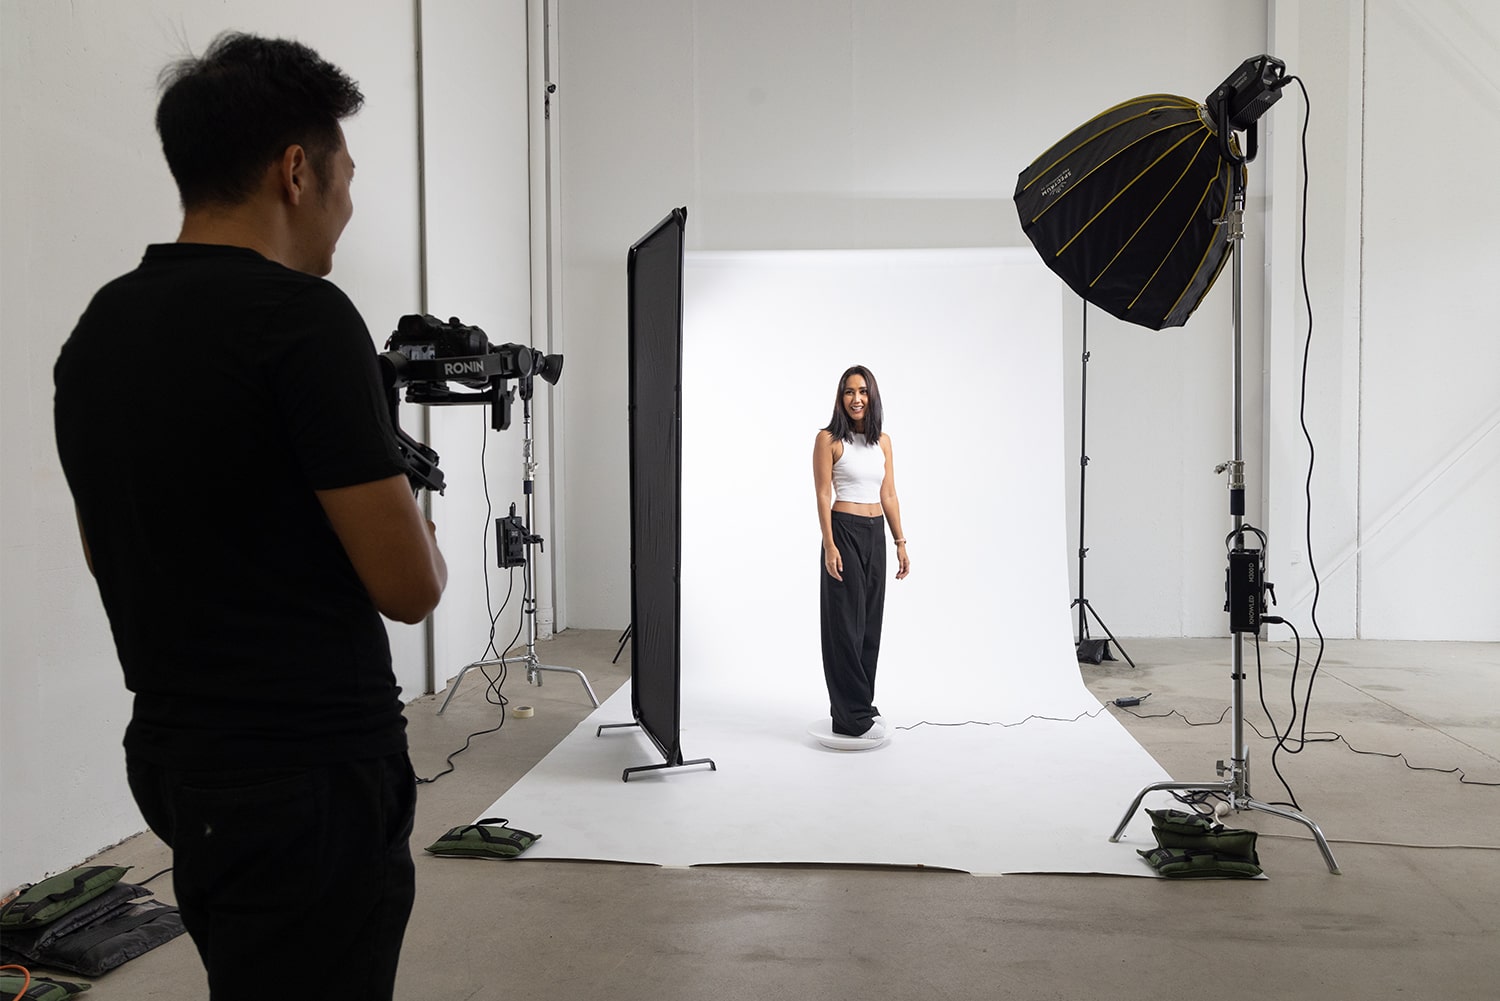 An image of a professional photo studio setup featuring a model standing on a 360-degree turntable, dressed in a white halter top and black pants. The model is smiling and posing confidently while a photographer is taking her photo. The studio is equipped with a seamless white paper backdrop, a v-flat backdrop, and a studio light, creating a well-lit environment for fashion photography.